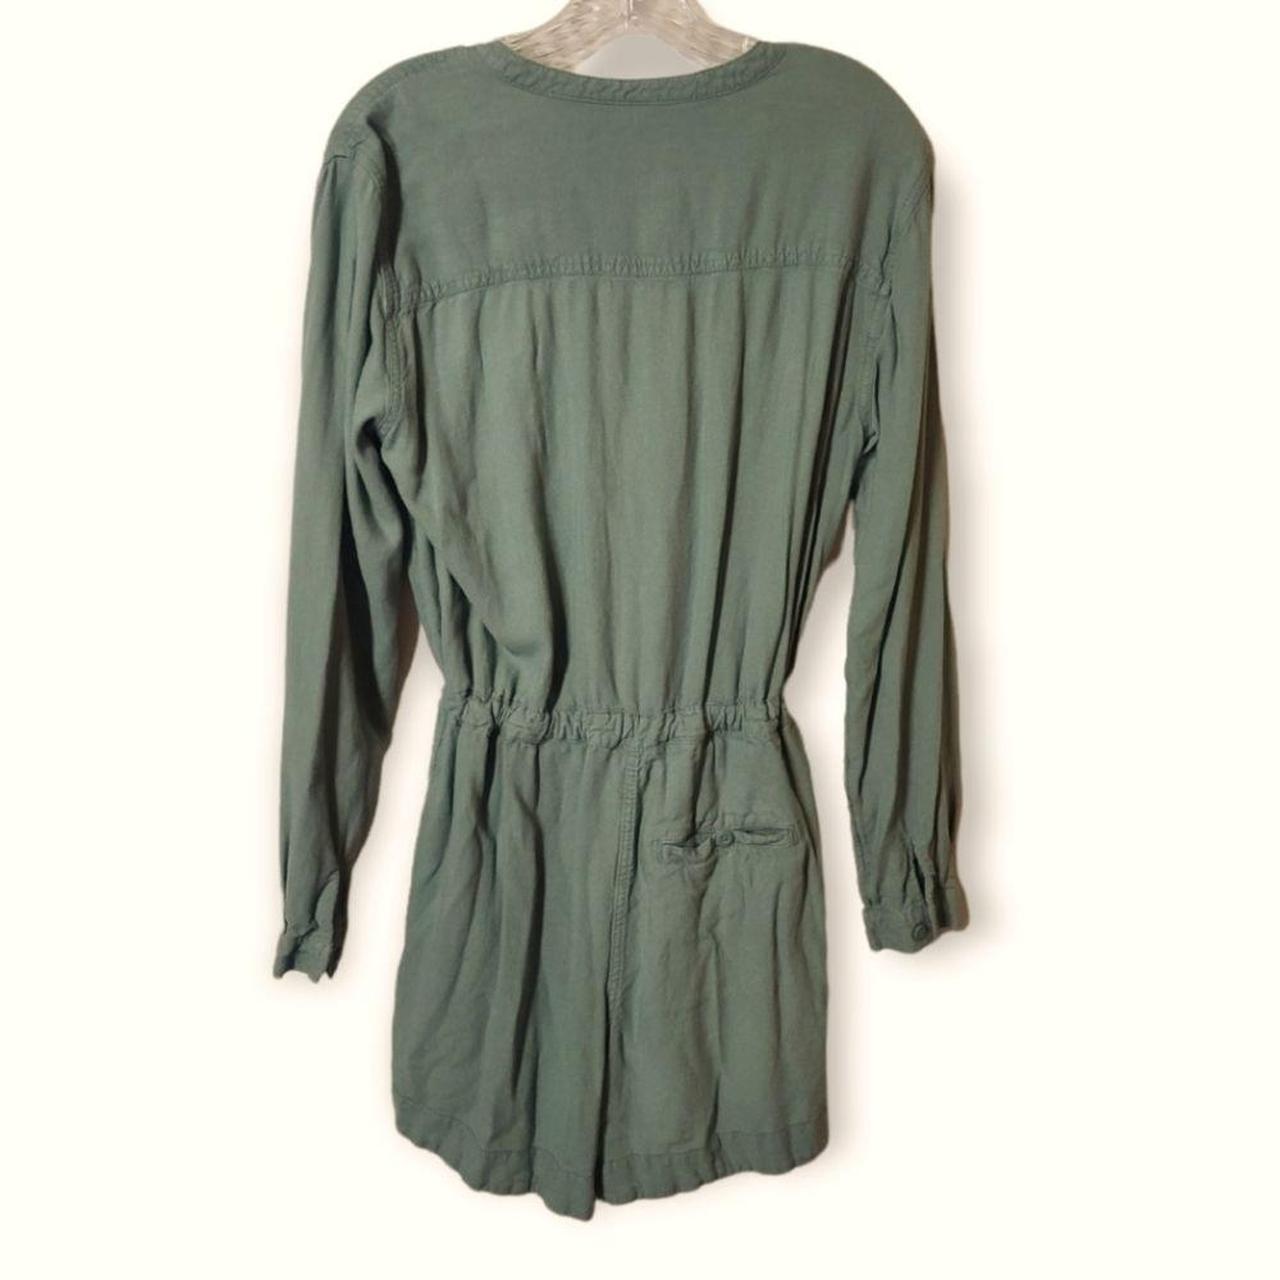 Product Image 4 - Old Navy Olive Green Romper,